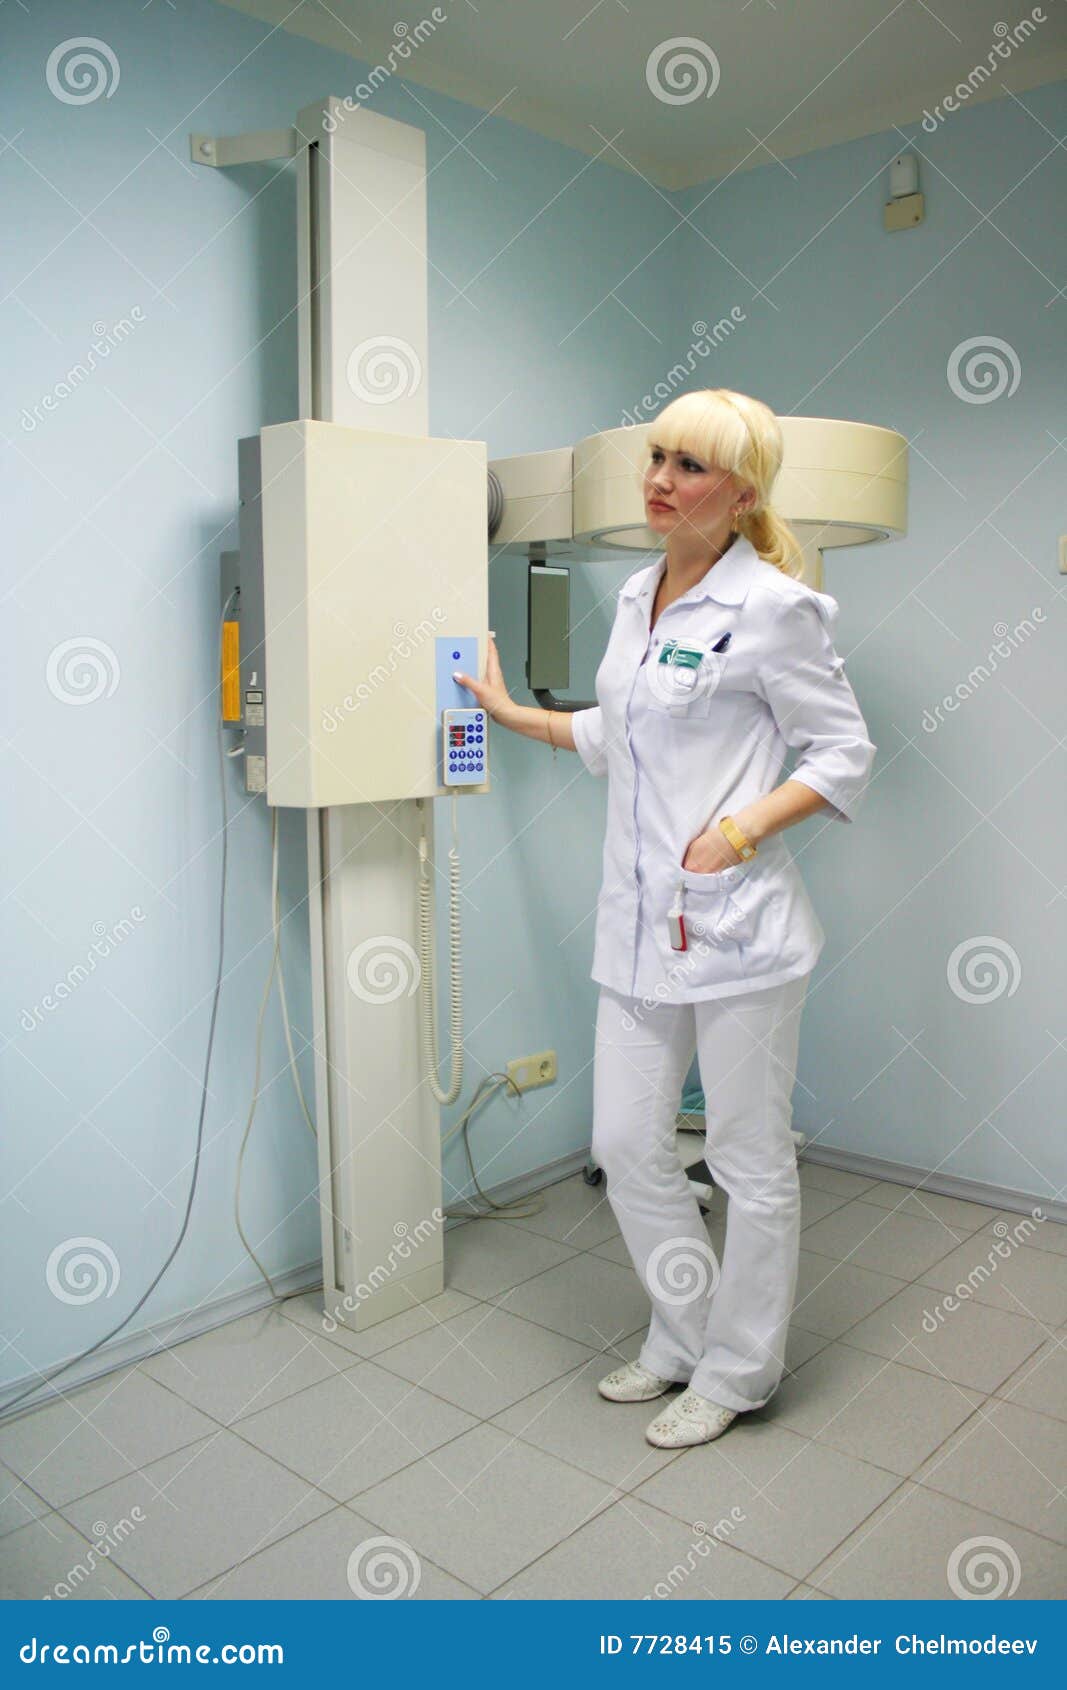 doctor connects the x-rays equipment